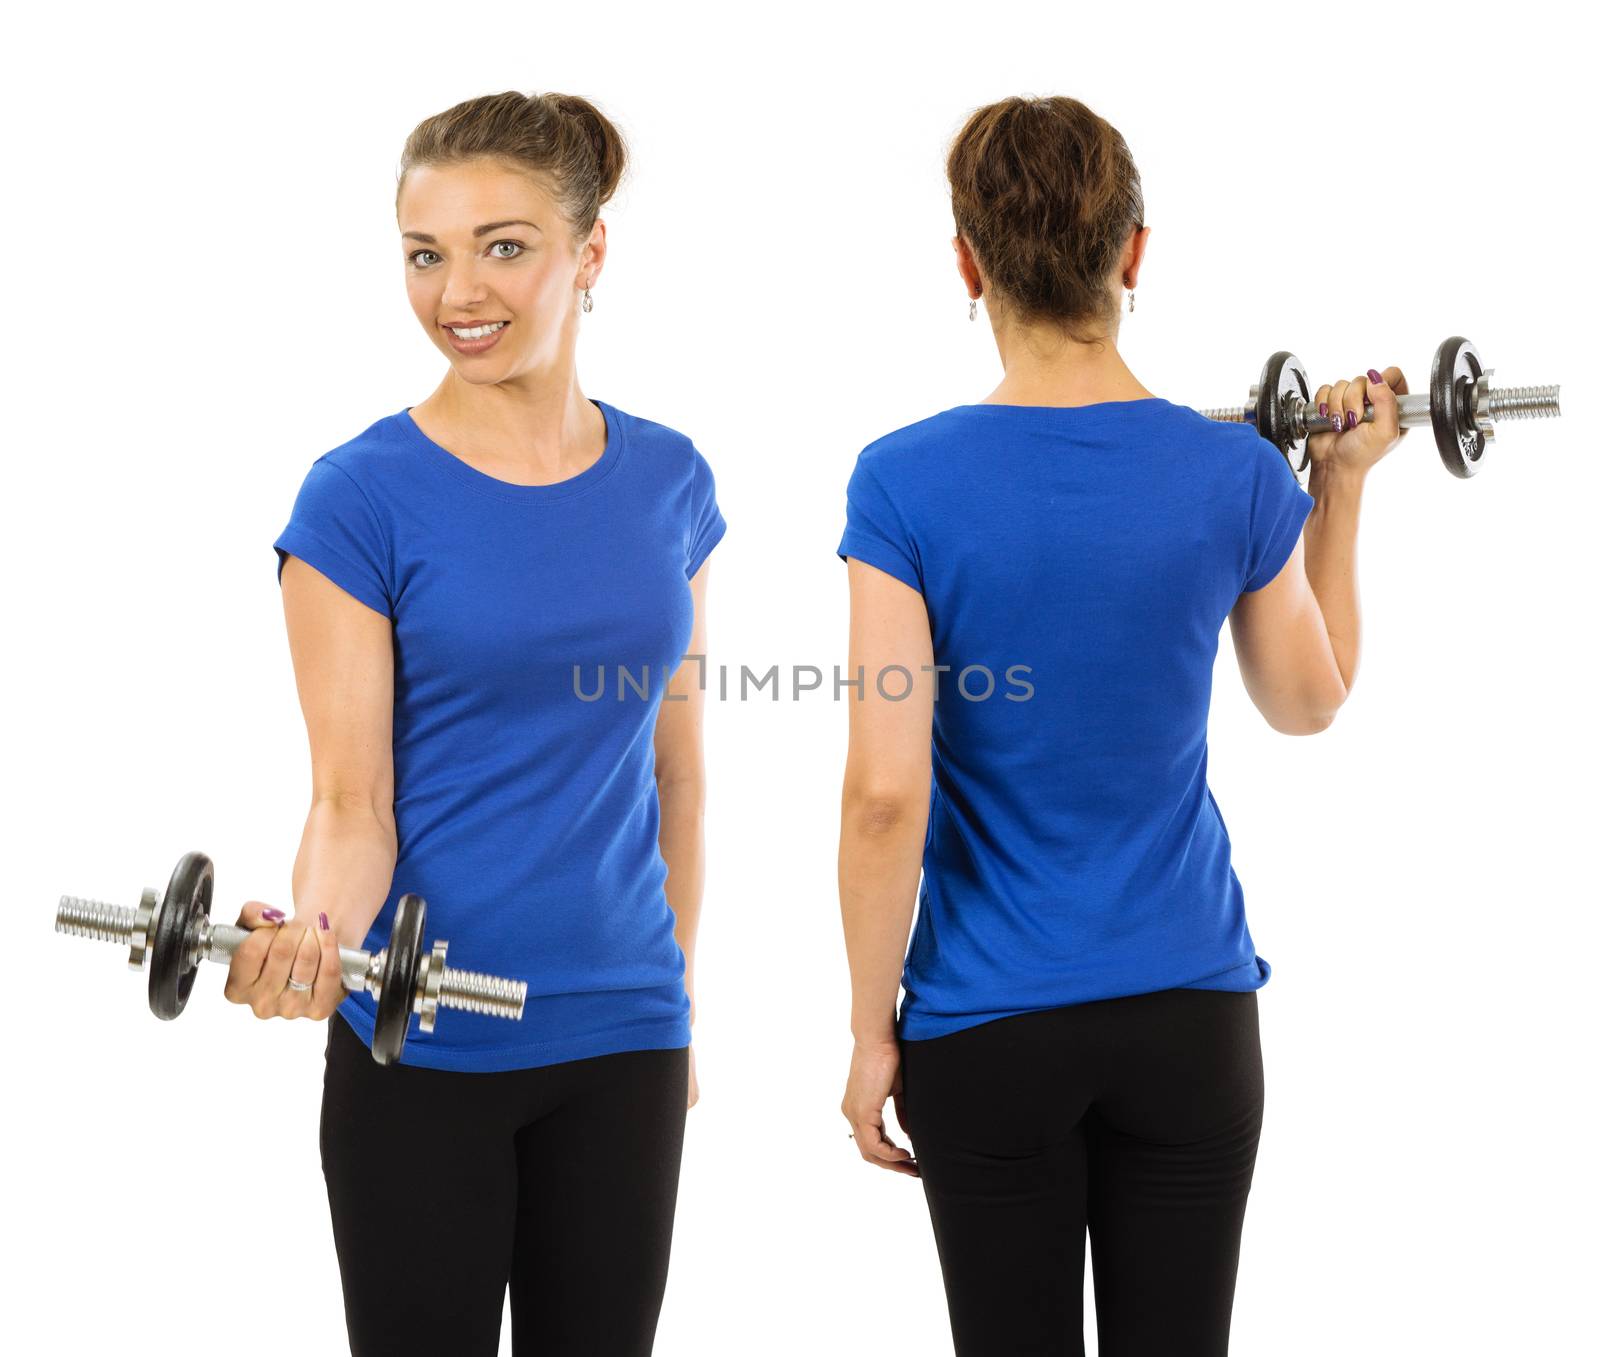 Photo of a woman posing with a blank blue t-shirt and lifting a dumbbell, ready for your artwork or design.